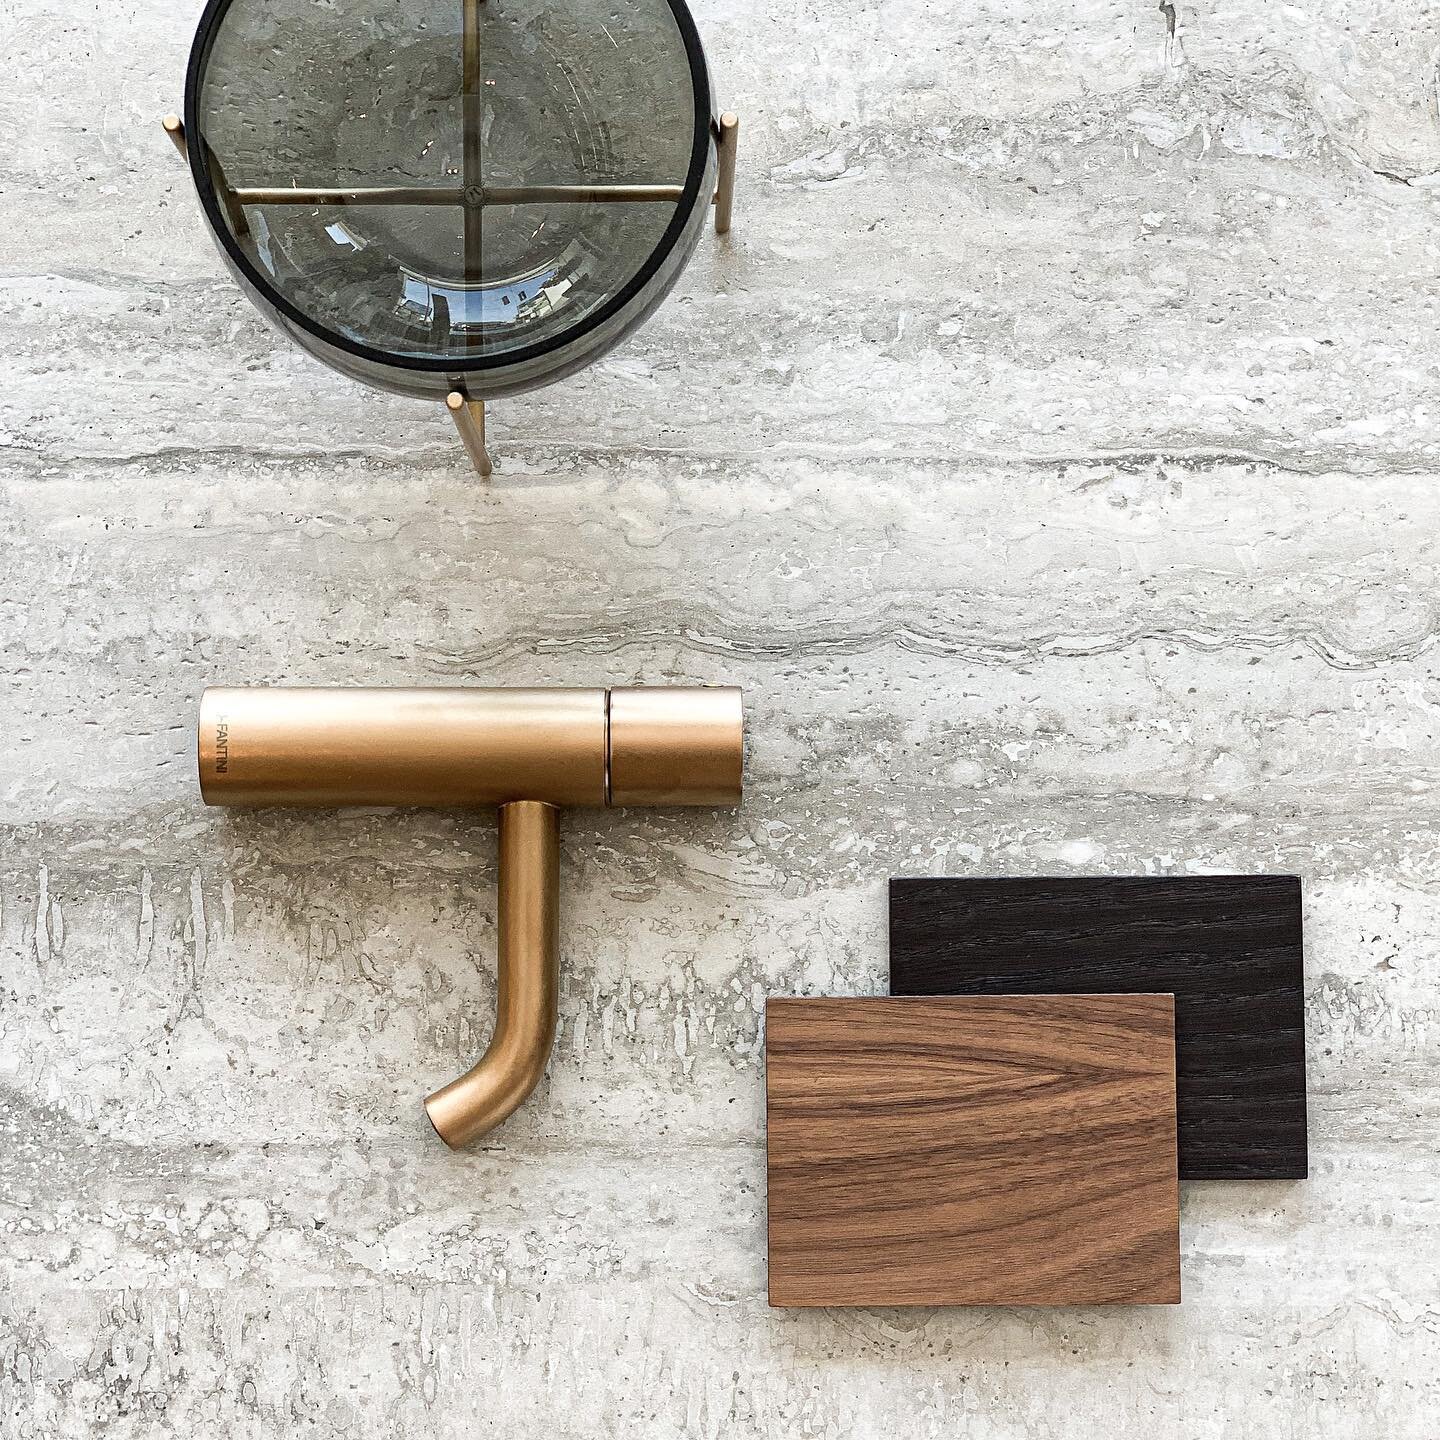 Current favorites at our Studio the beautiful Travertino Silver from @marazziceramiche together with @fantini_official brass &amp; @jmm.group walnut and chocolat veneers ✨ Discover the best finishings and materials for your home project at @built.cab